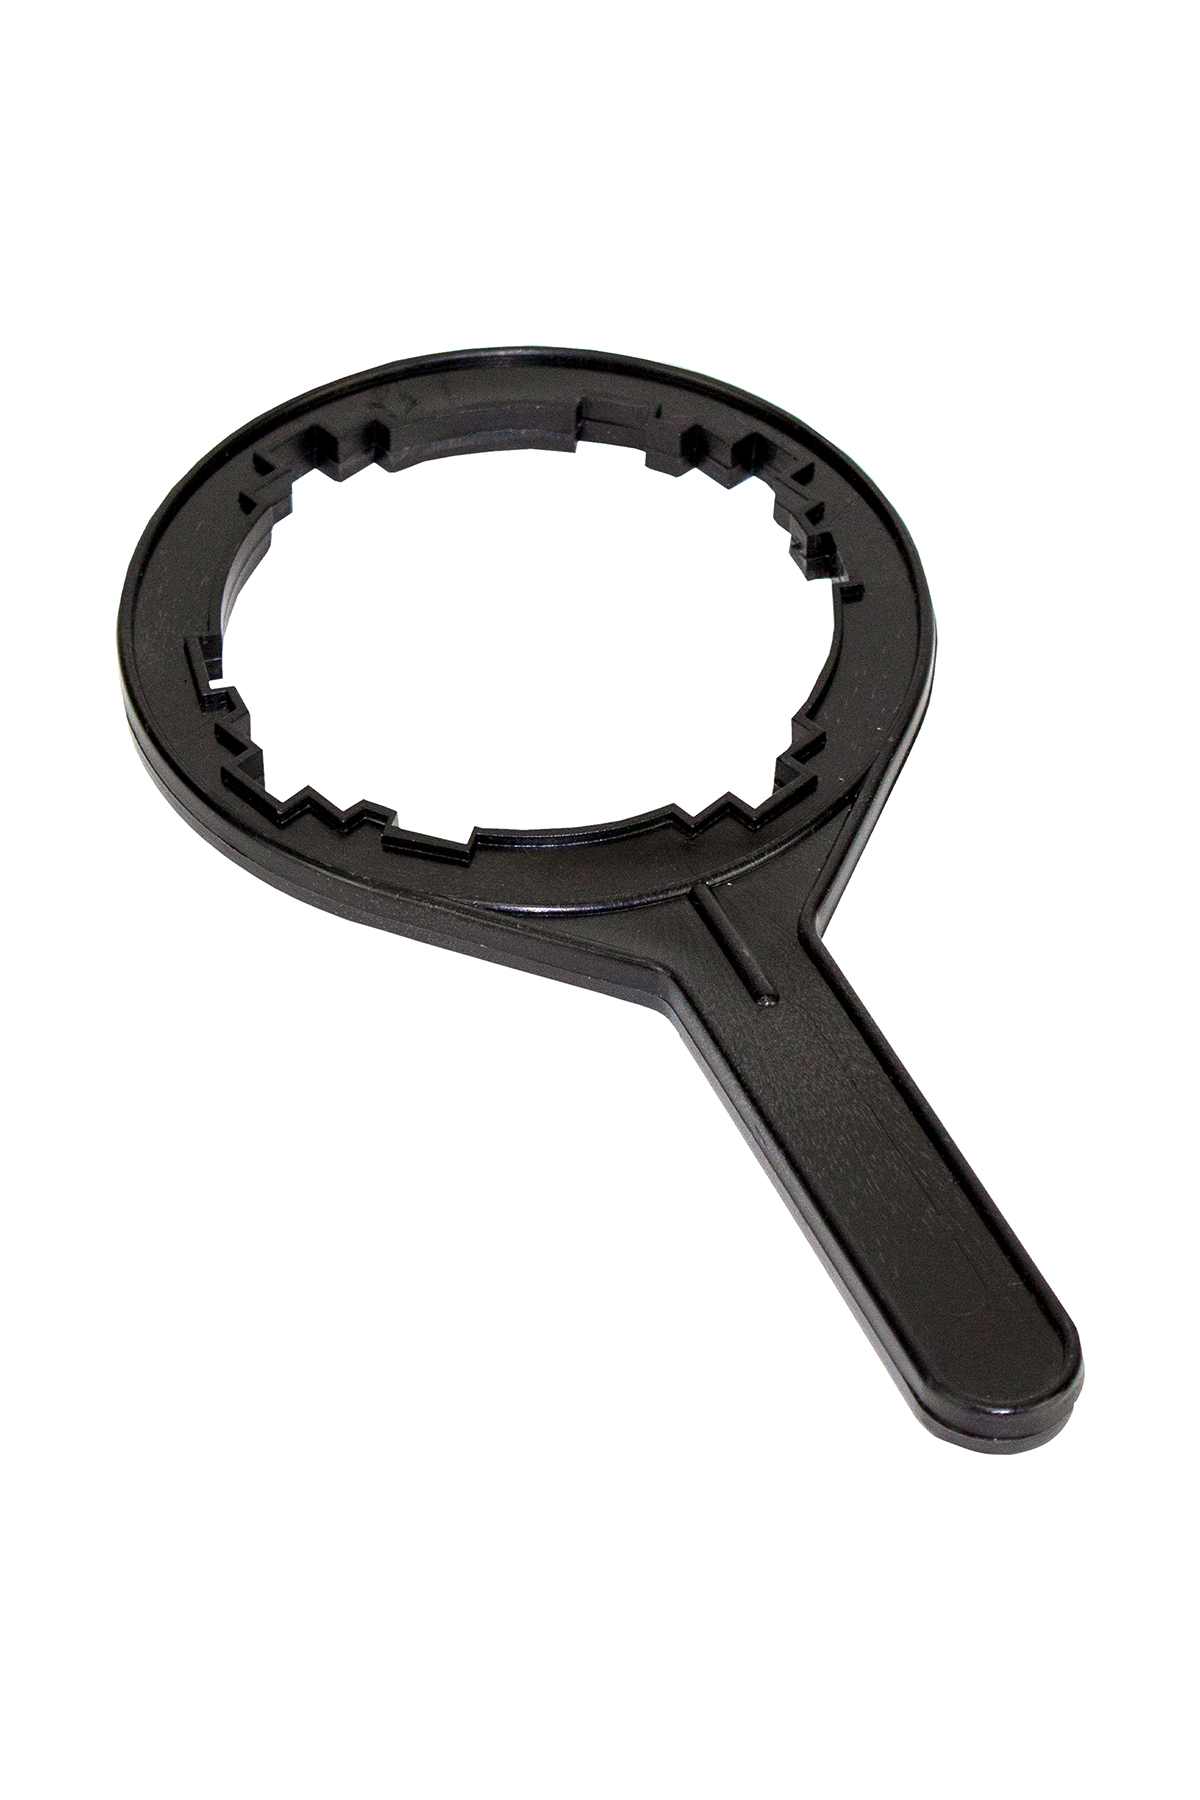 Key for the membrane housing